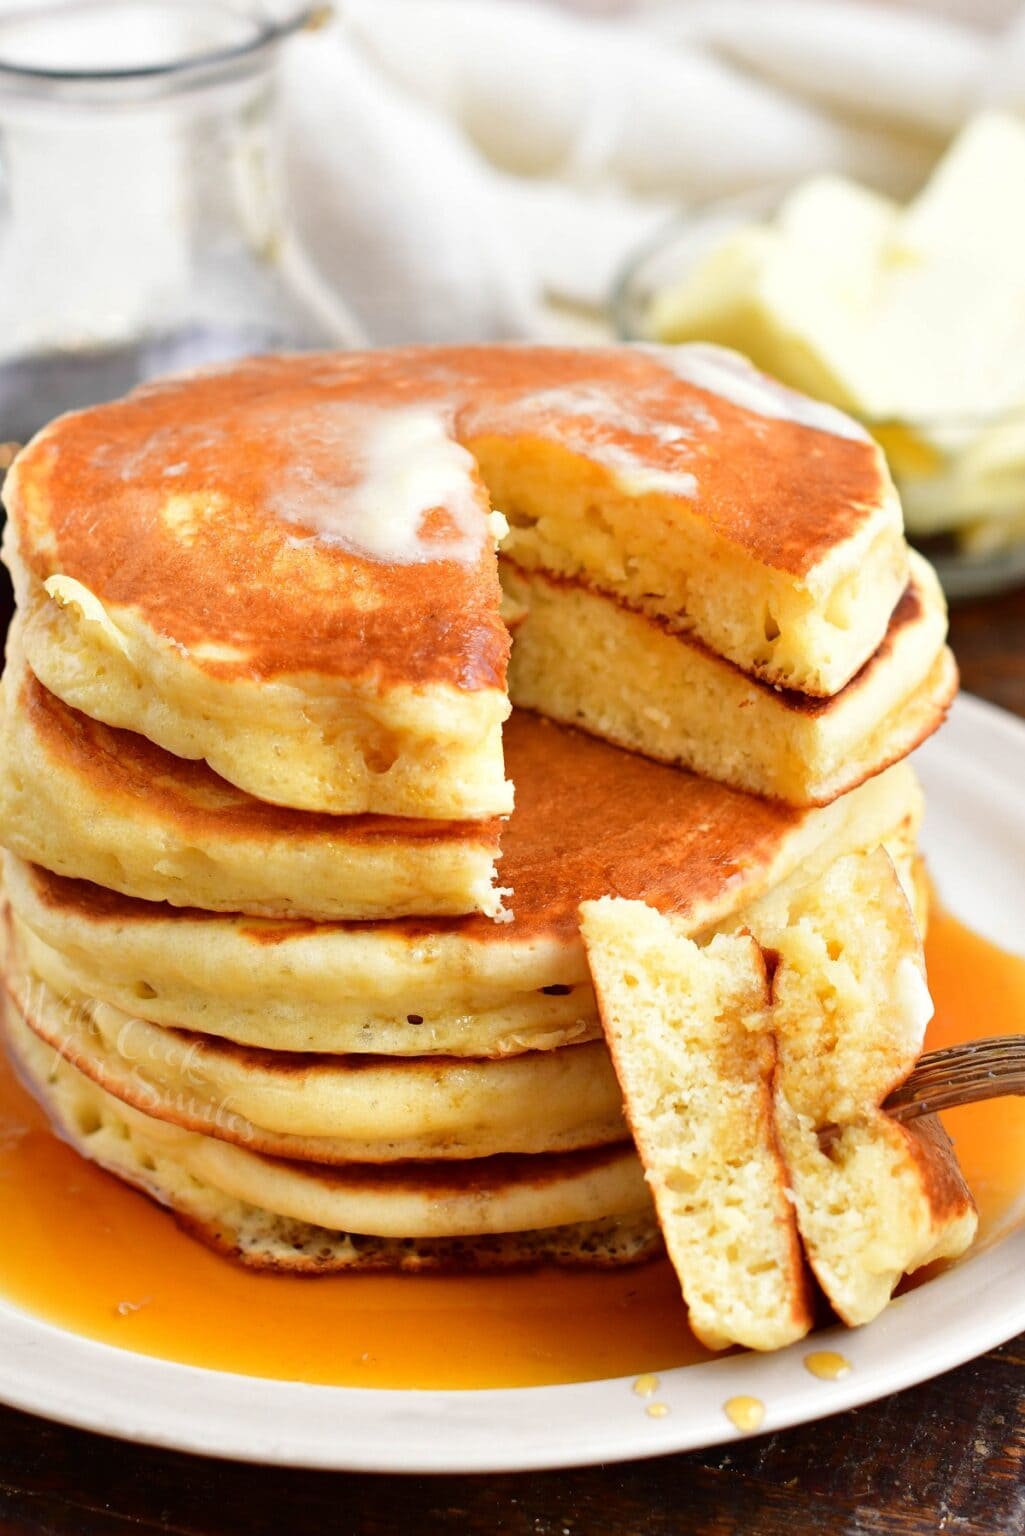 Buttermilk Pancakes - Nothing Like Soft and Fluffy Homemade Pancakes!